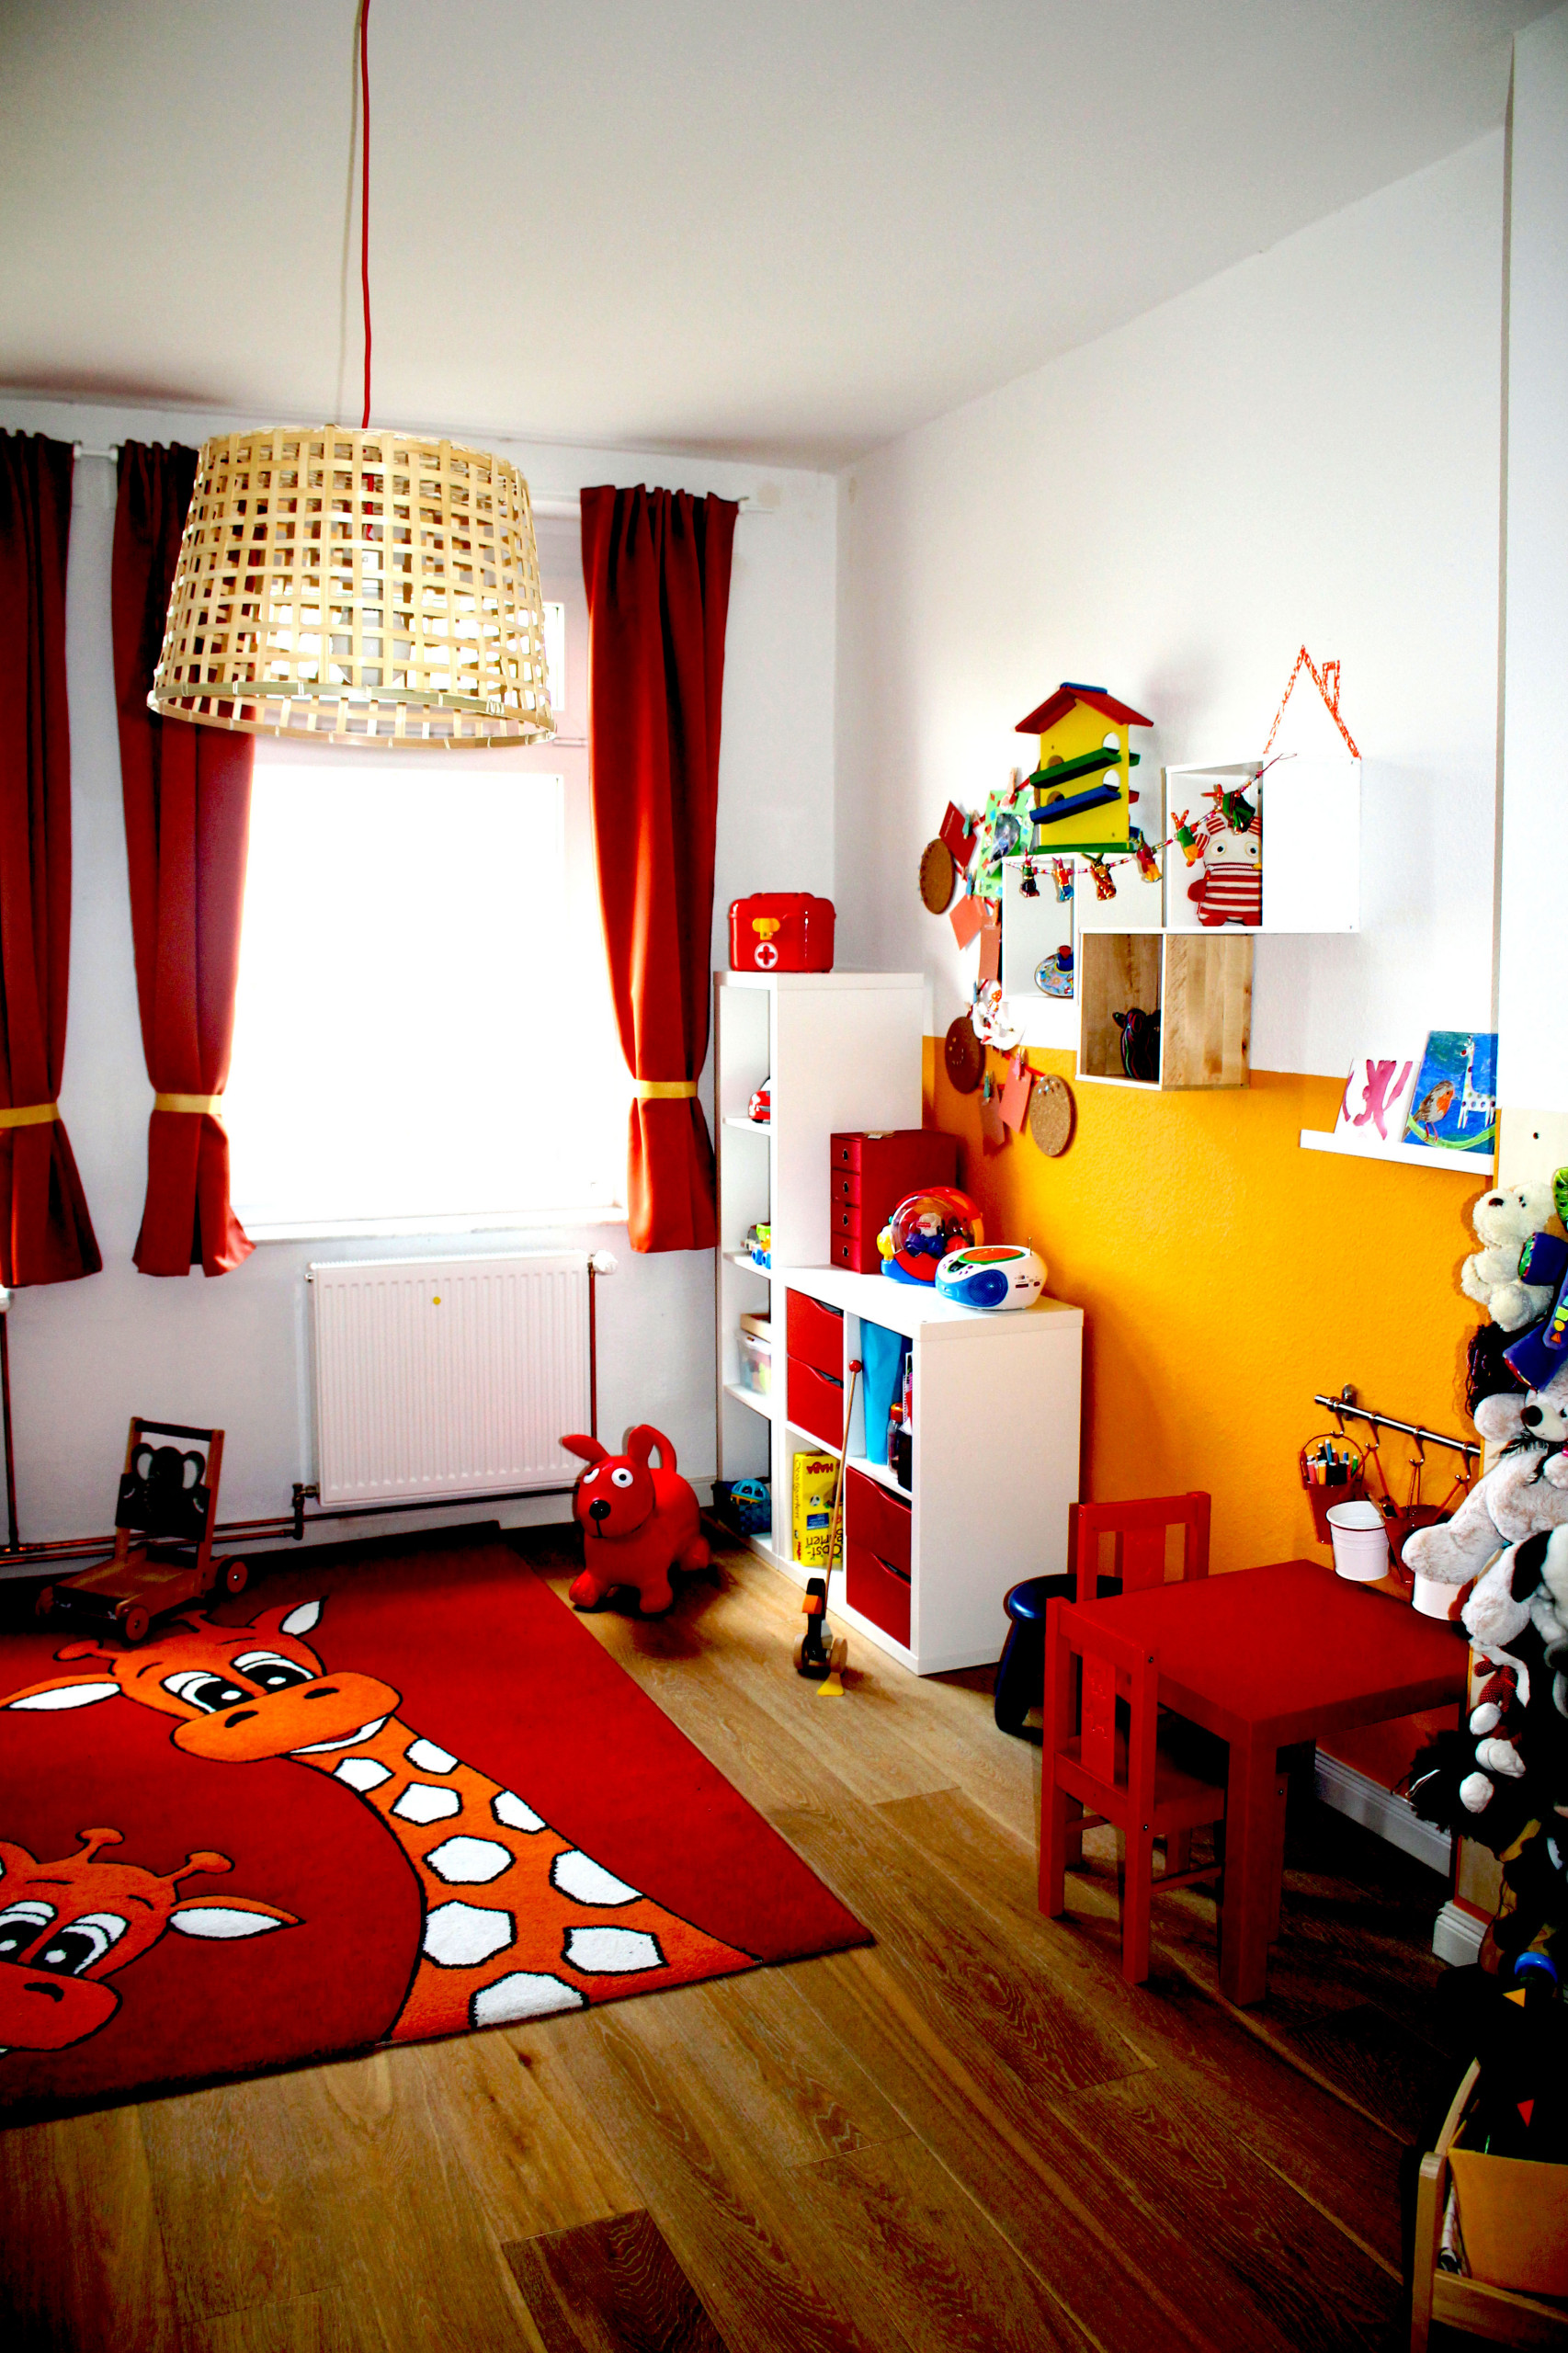 75 Beautiful Laminate Floor Kids' Room Pictures & Ideas - Color: Red -  September, 2022 | Houzz